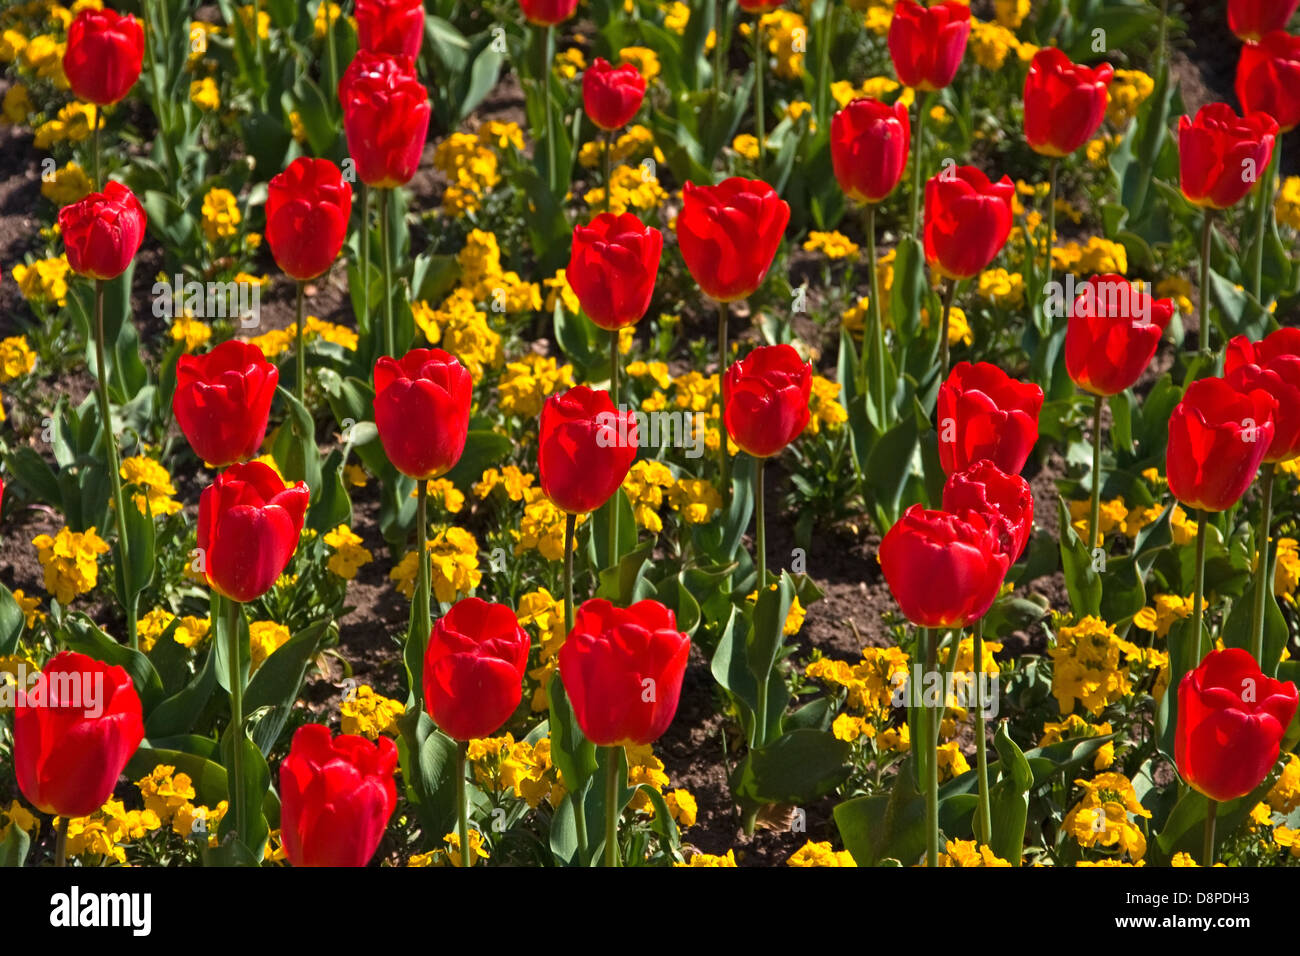 A mixture of yellow wallflowers and red tulips in spring garden Stock Photo